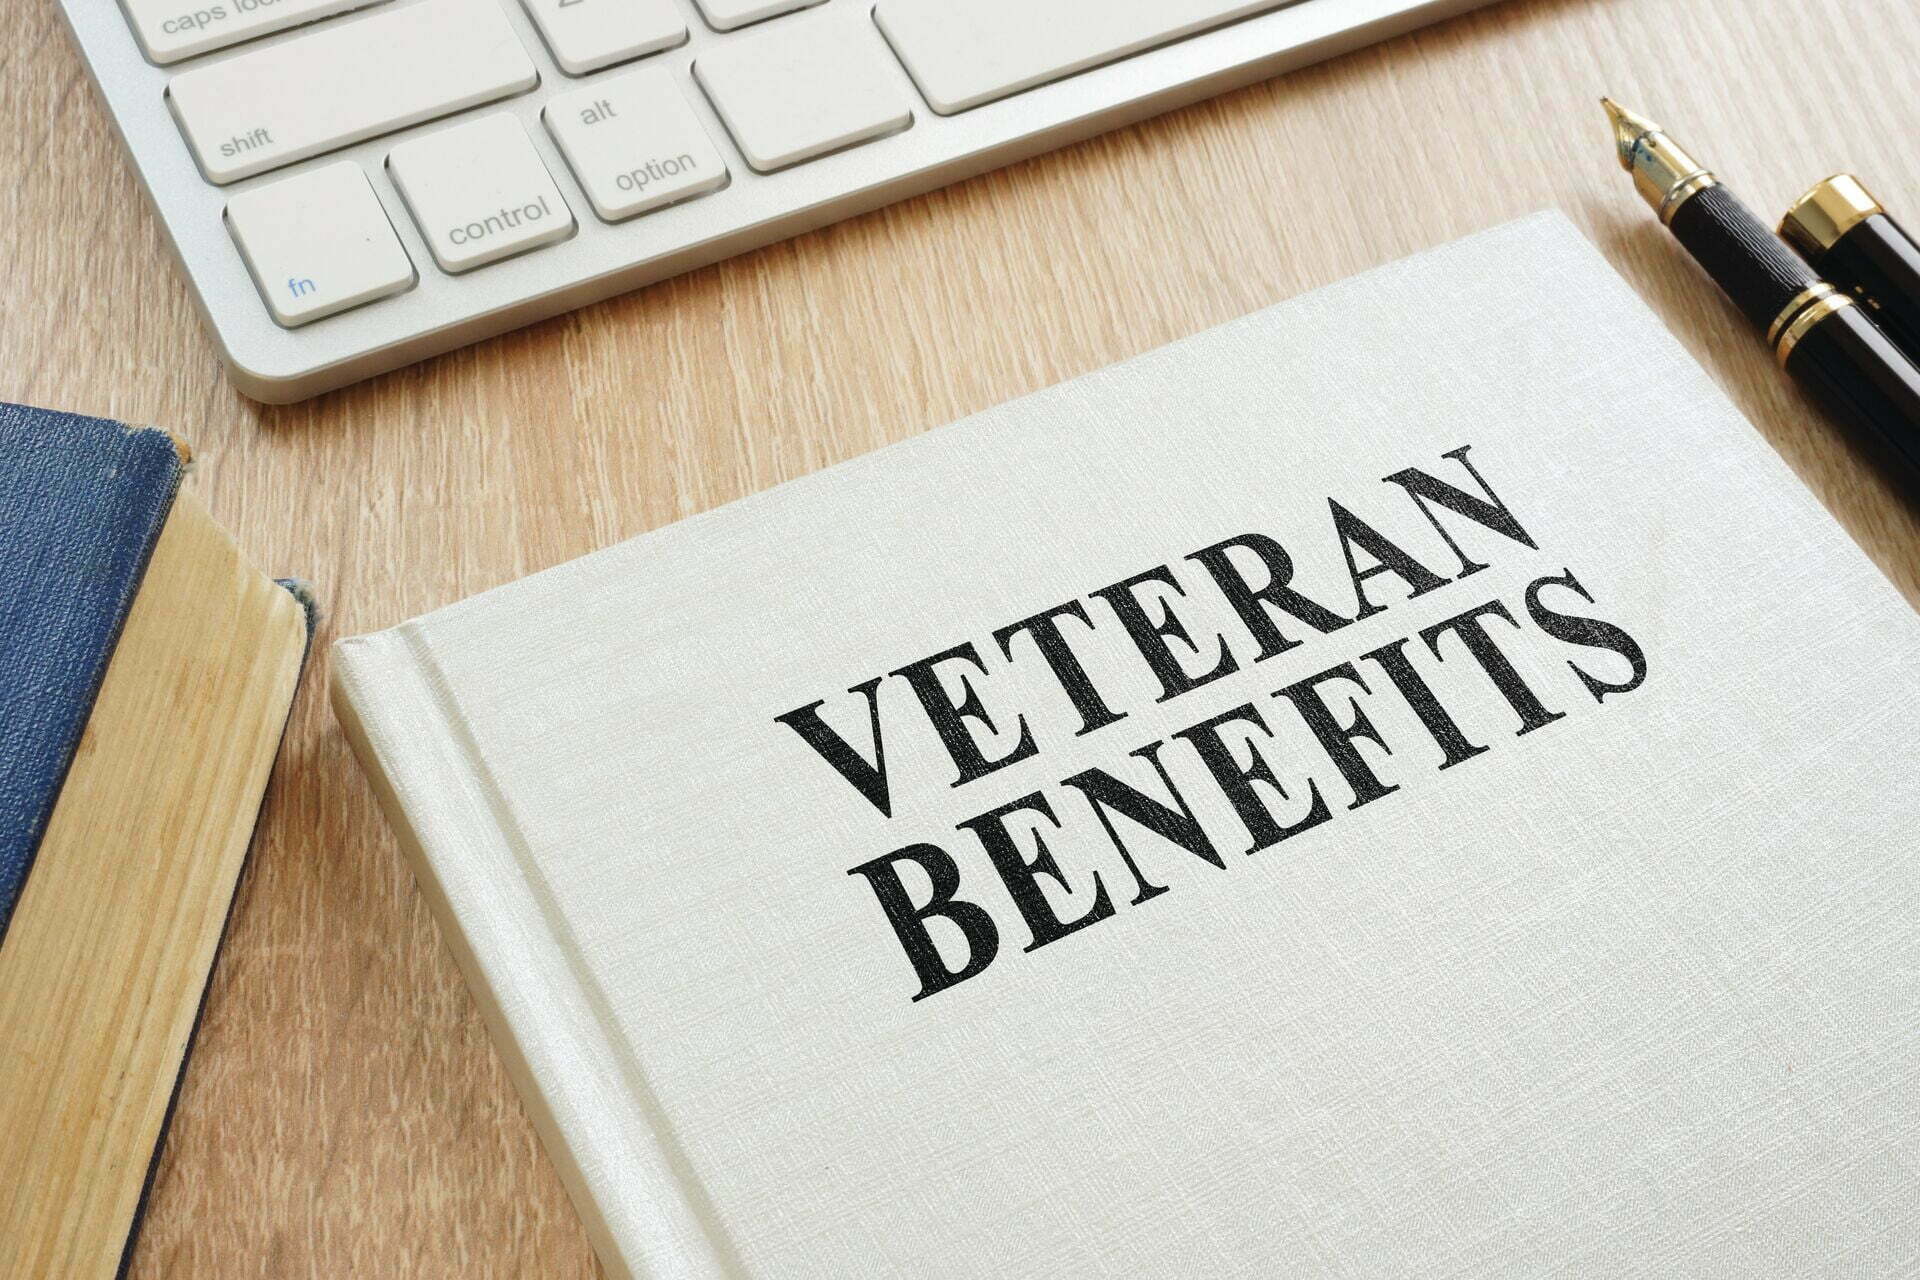 Many older veterans may be eligible to take advantage of home care benefit options but may simply not know about them or forgot about them.